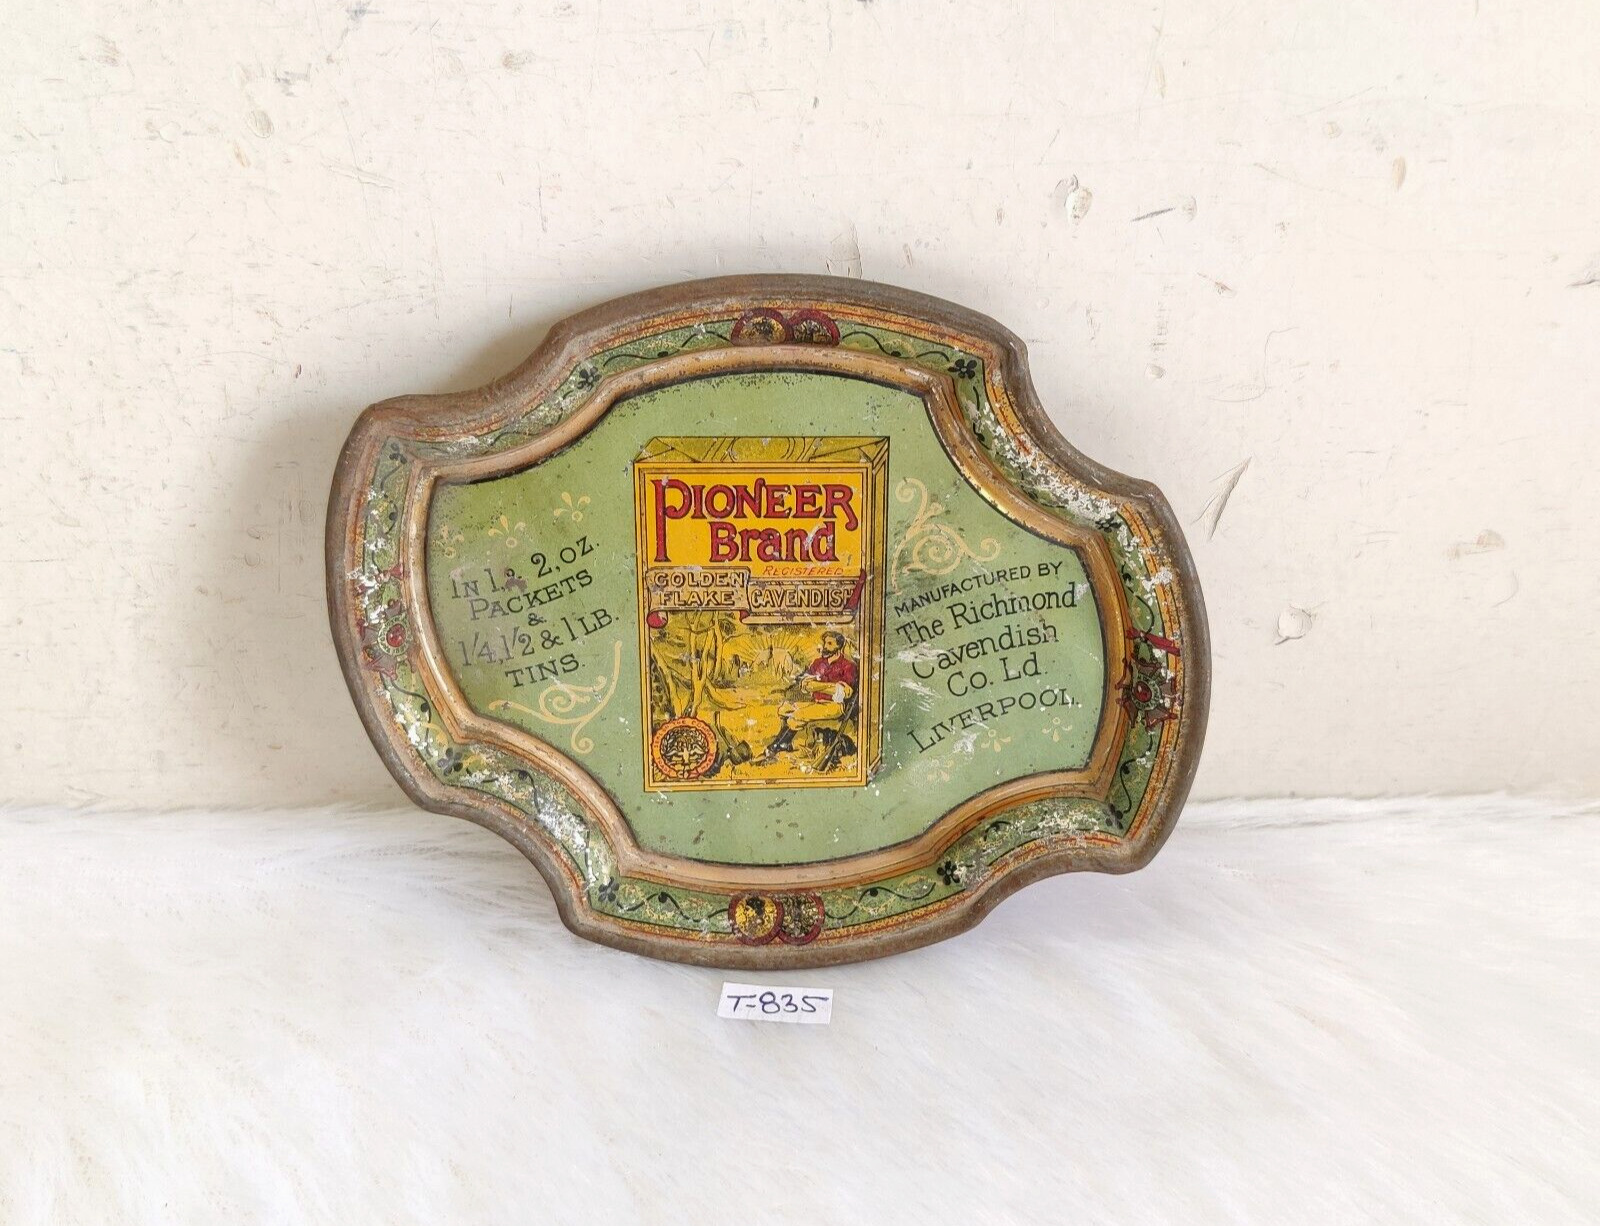 1920s Vintage Payoneer Brand Cigarette Advertising Litho Tin Tray Rare Prop T835